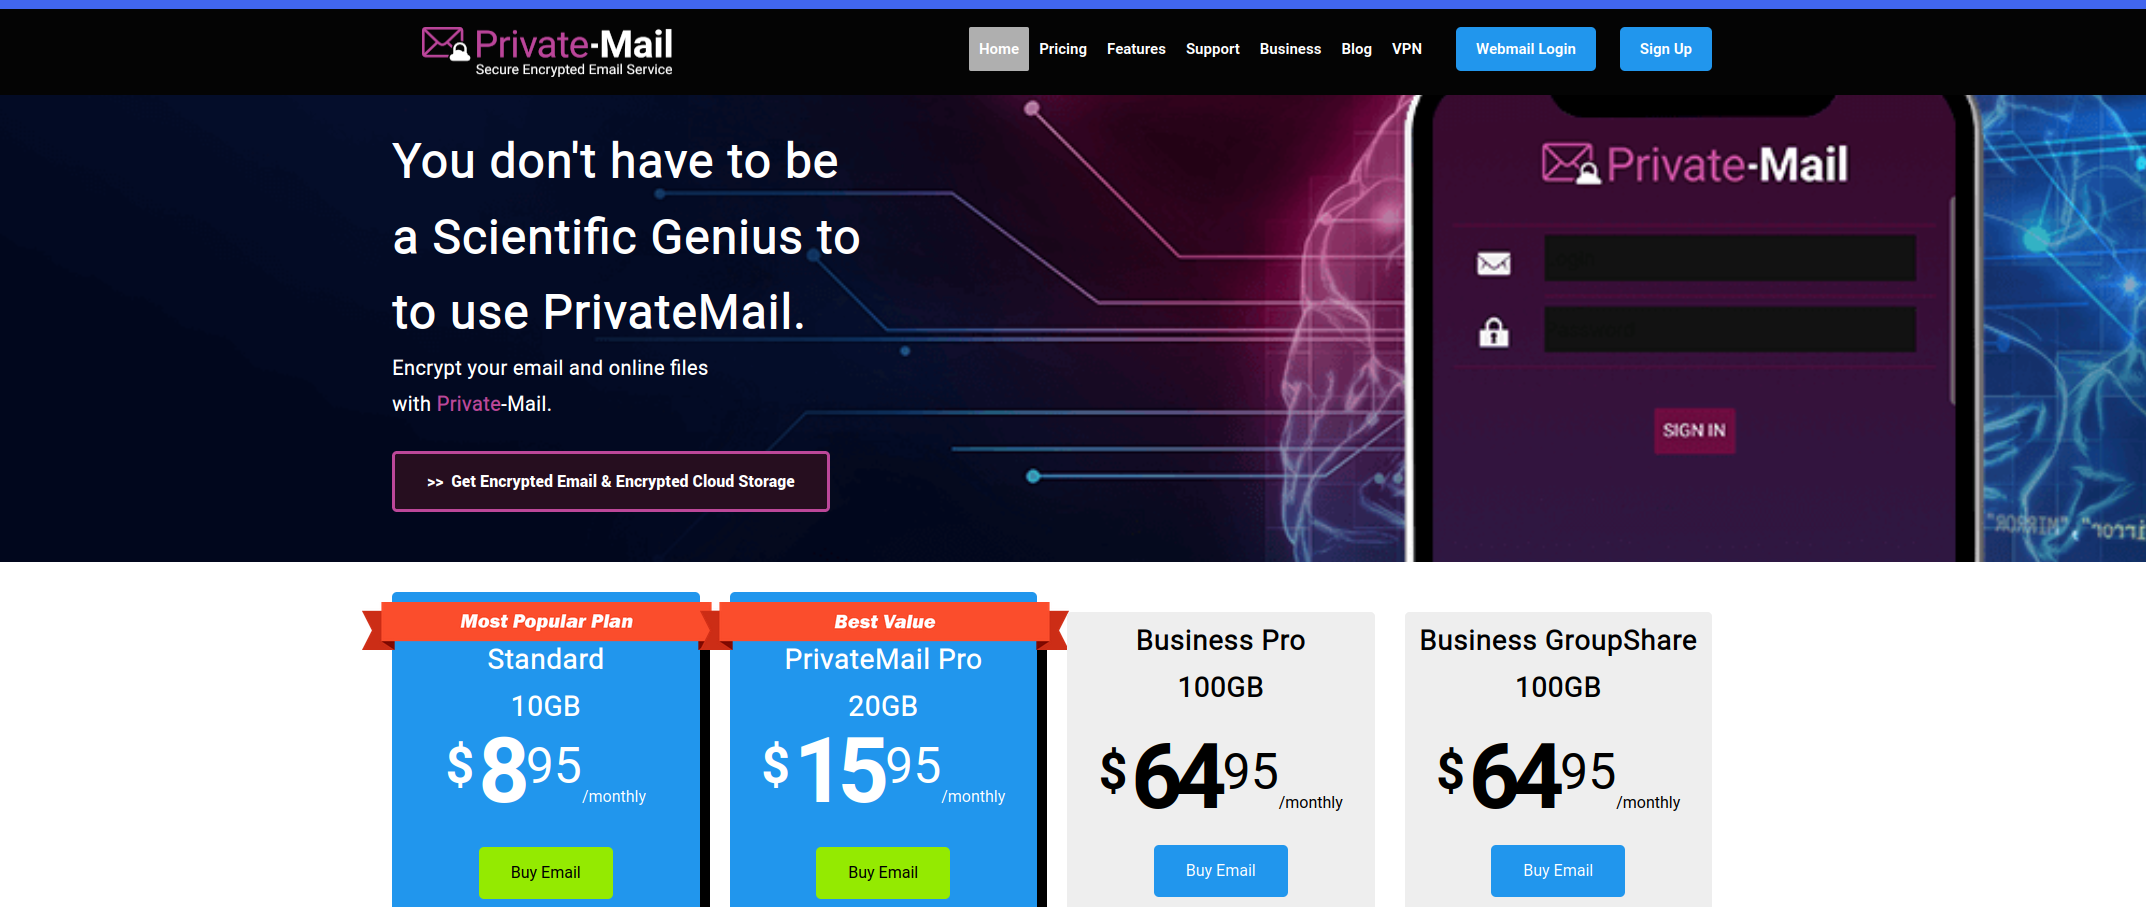 Private-Mail is known for its privacy protection, but is based in the US